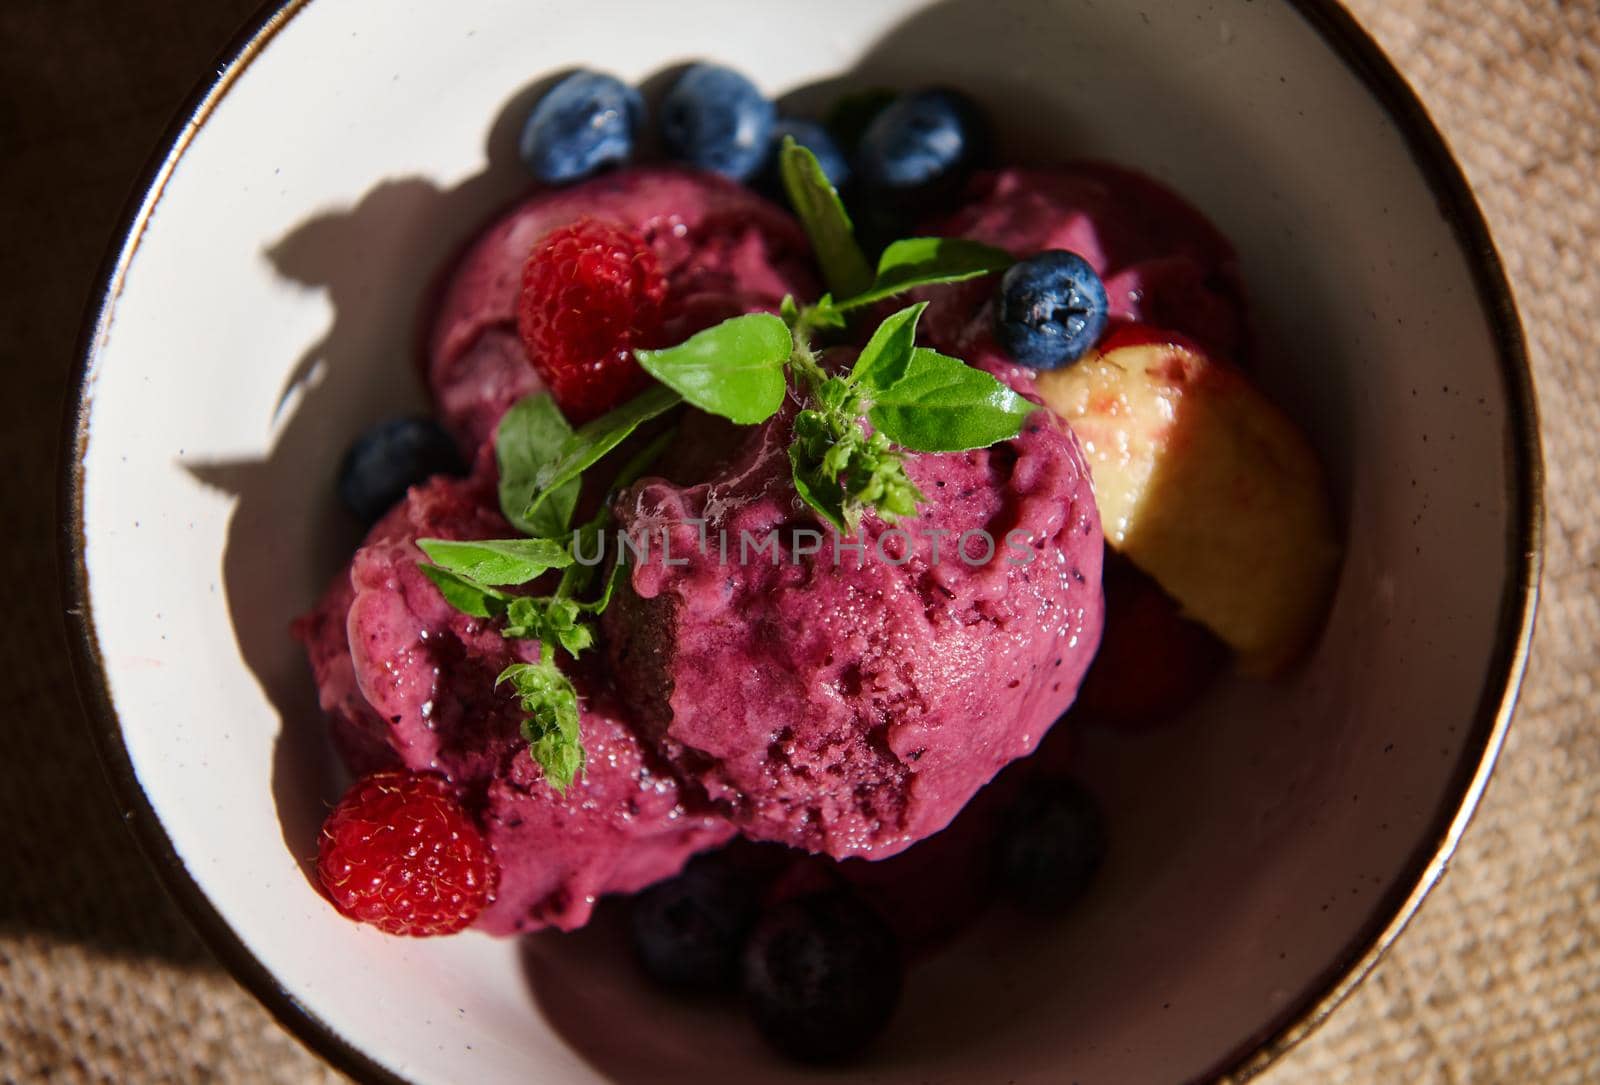 Flat lay. Food still life. Homemade purple, raw vegan, healthy berry ice cream sorbet, with ripe juicy fruits, blueberries and lemon basil leaves in a ceramic bowl on a linen tablecloth. Copy ad space